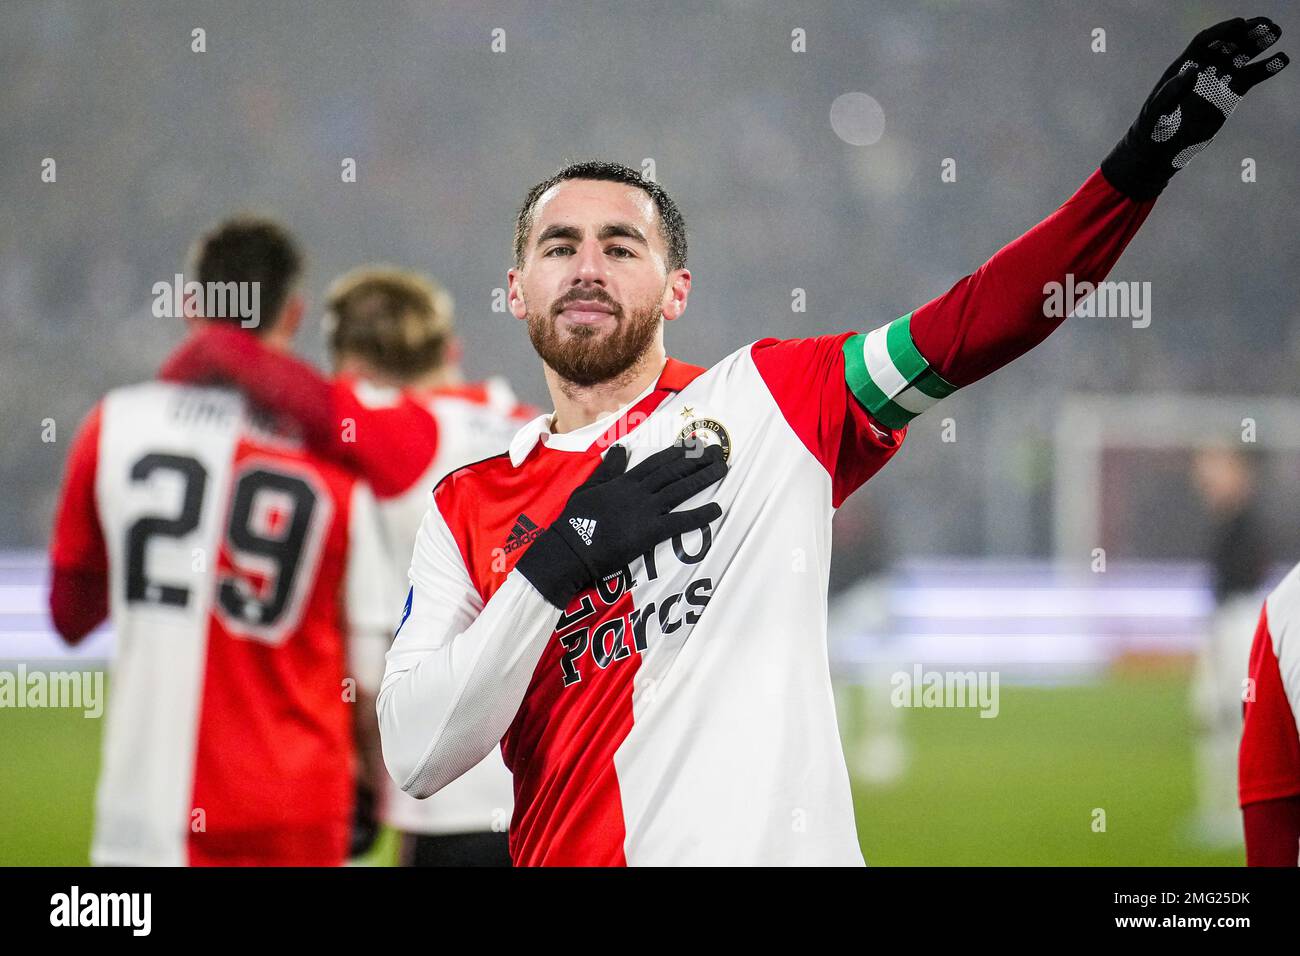 Rotterdam - Orkun Kokcu of Feyenoord celebrates the 2-0 during the match between Feyenoord v NEC Nijmegen at Stadion Feijenoord De Kuip on 25 January 2023 in Rotterdam, Netherlands. (Box to Box Pictures/Tom Bode) Stock Photo